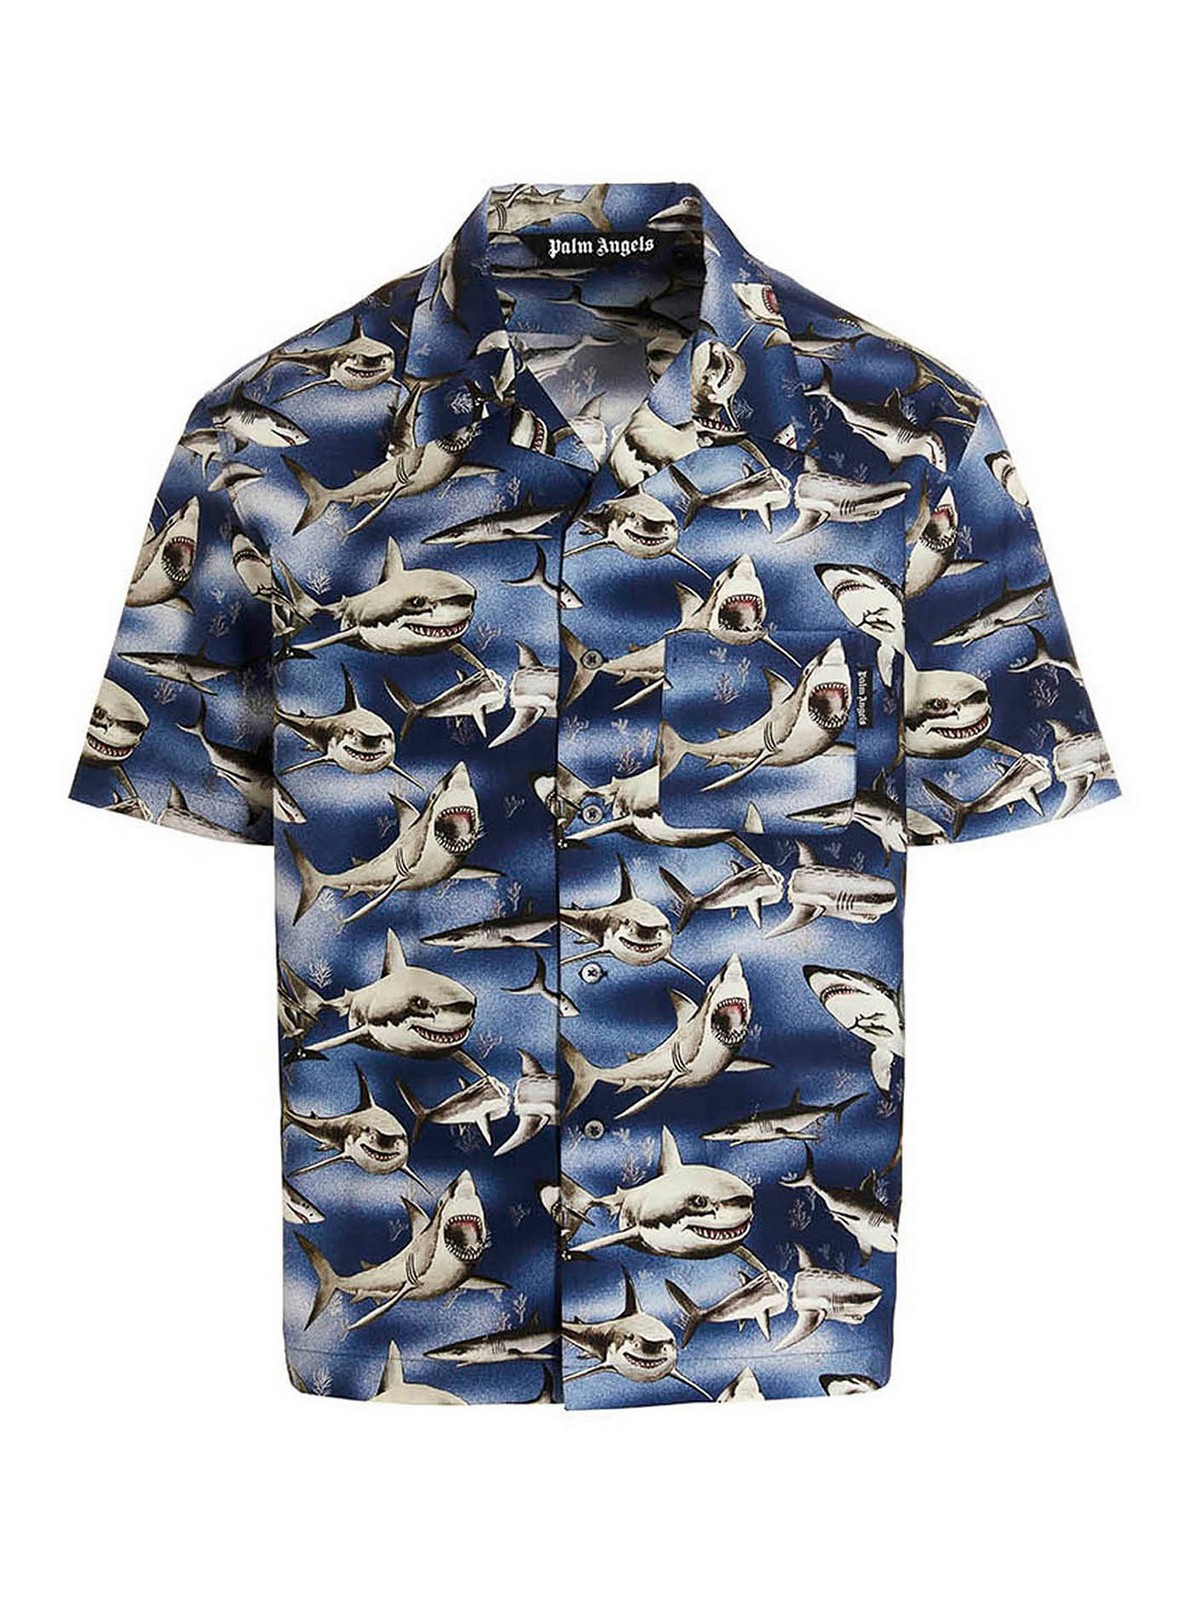 Palm Angels Sharks Shirt In Blue